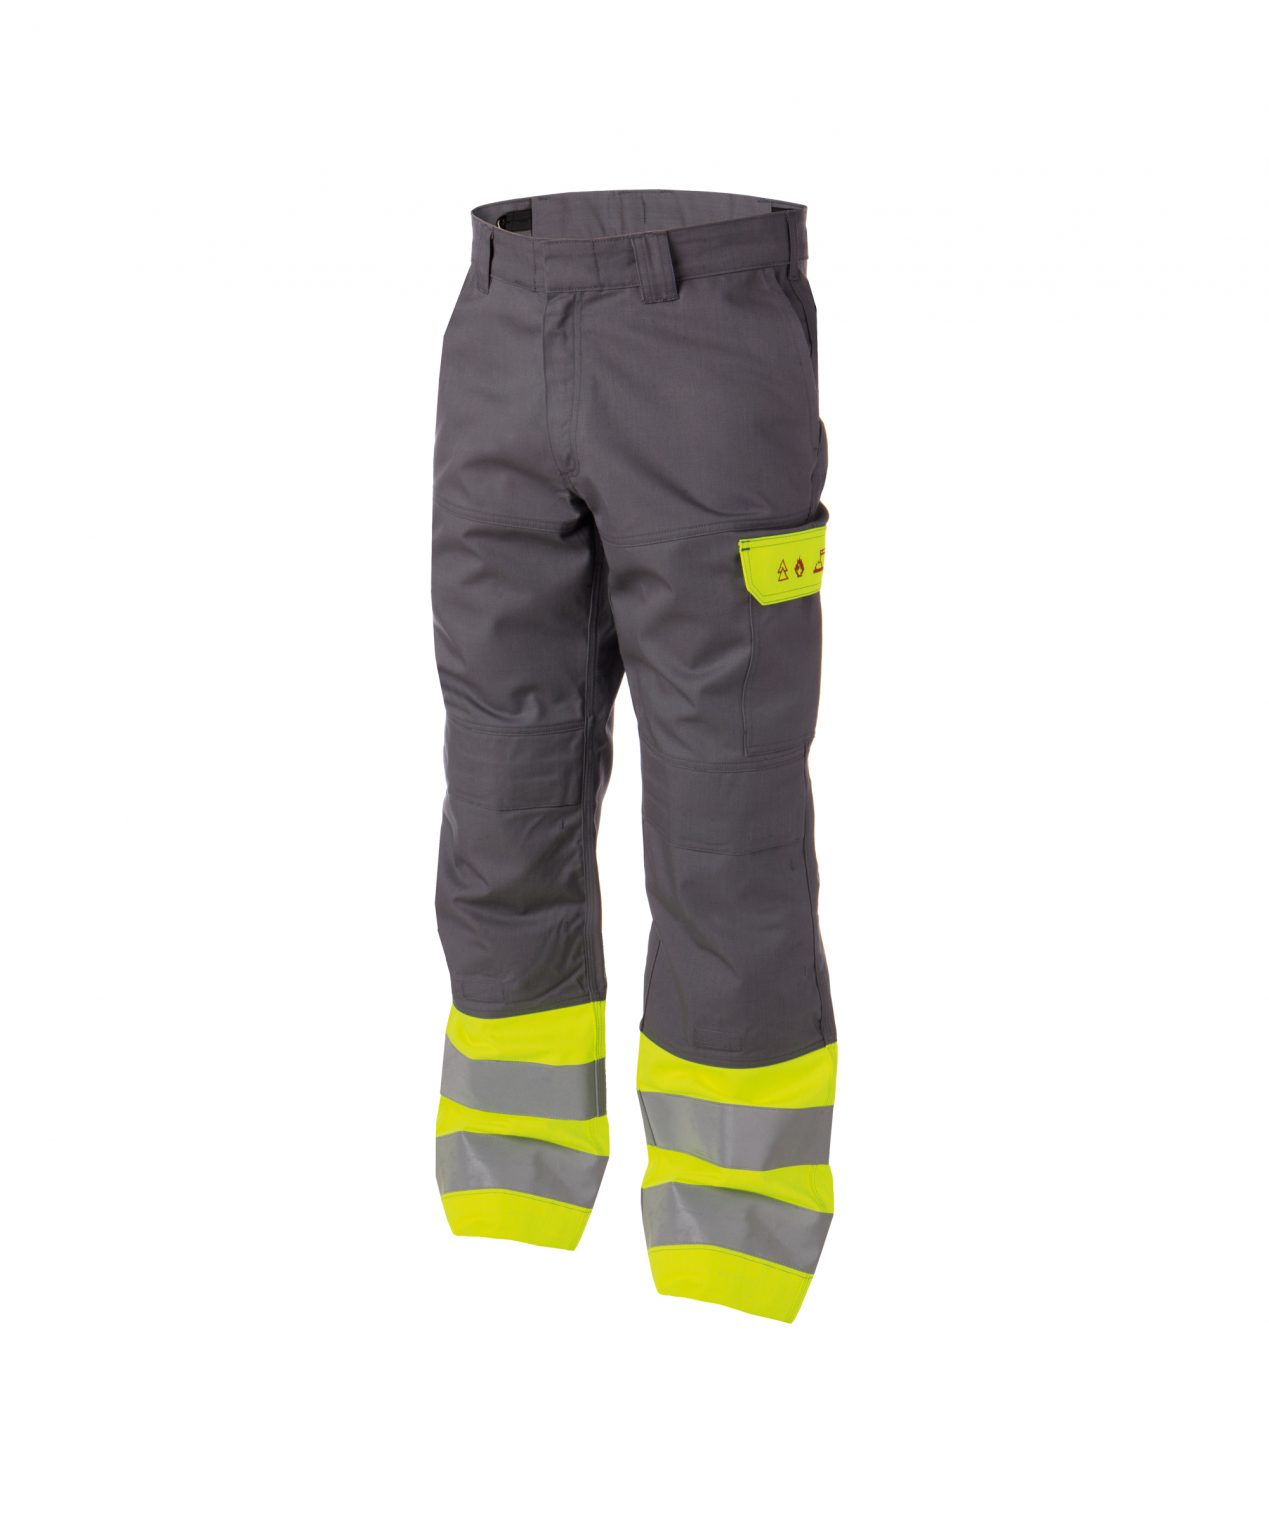 lenox multinorm high visibilty work trousers with knee pockets graphite grey fluo yellow detail 1